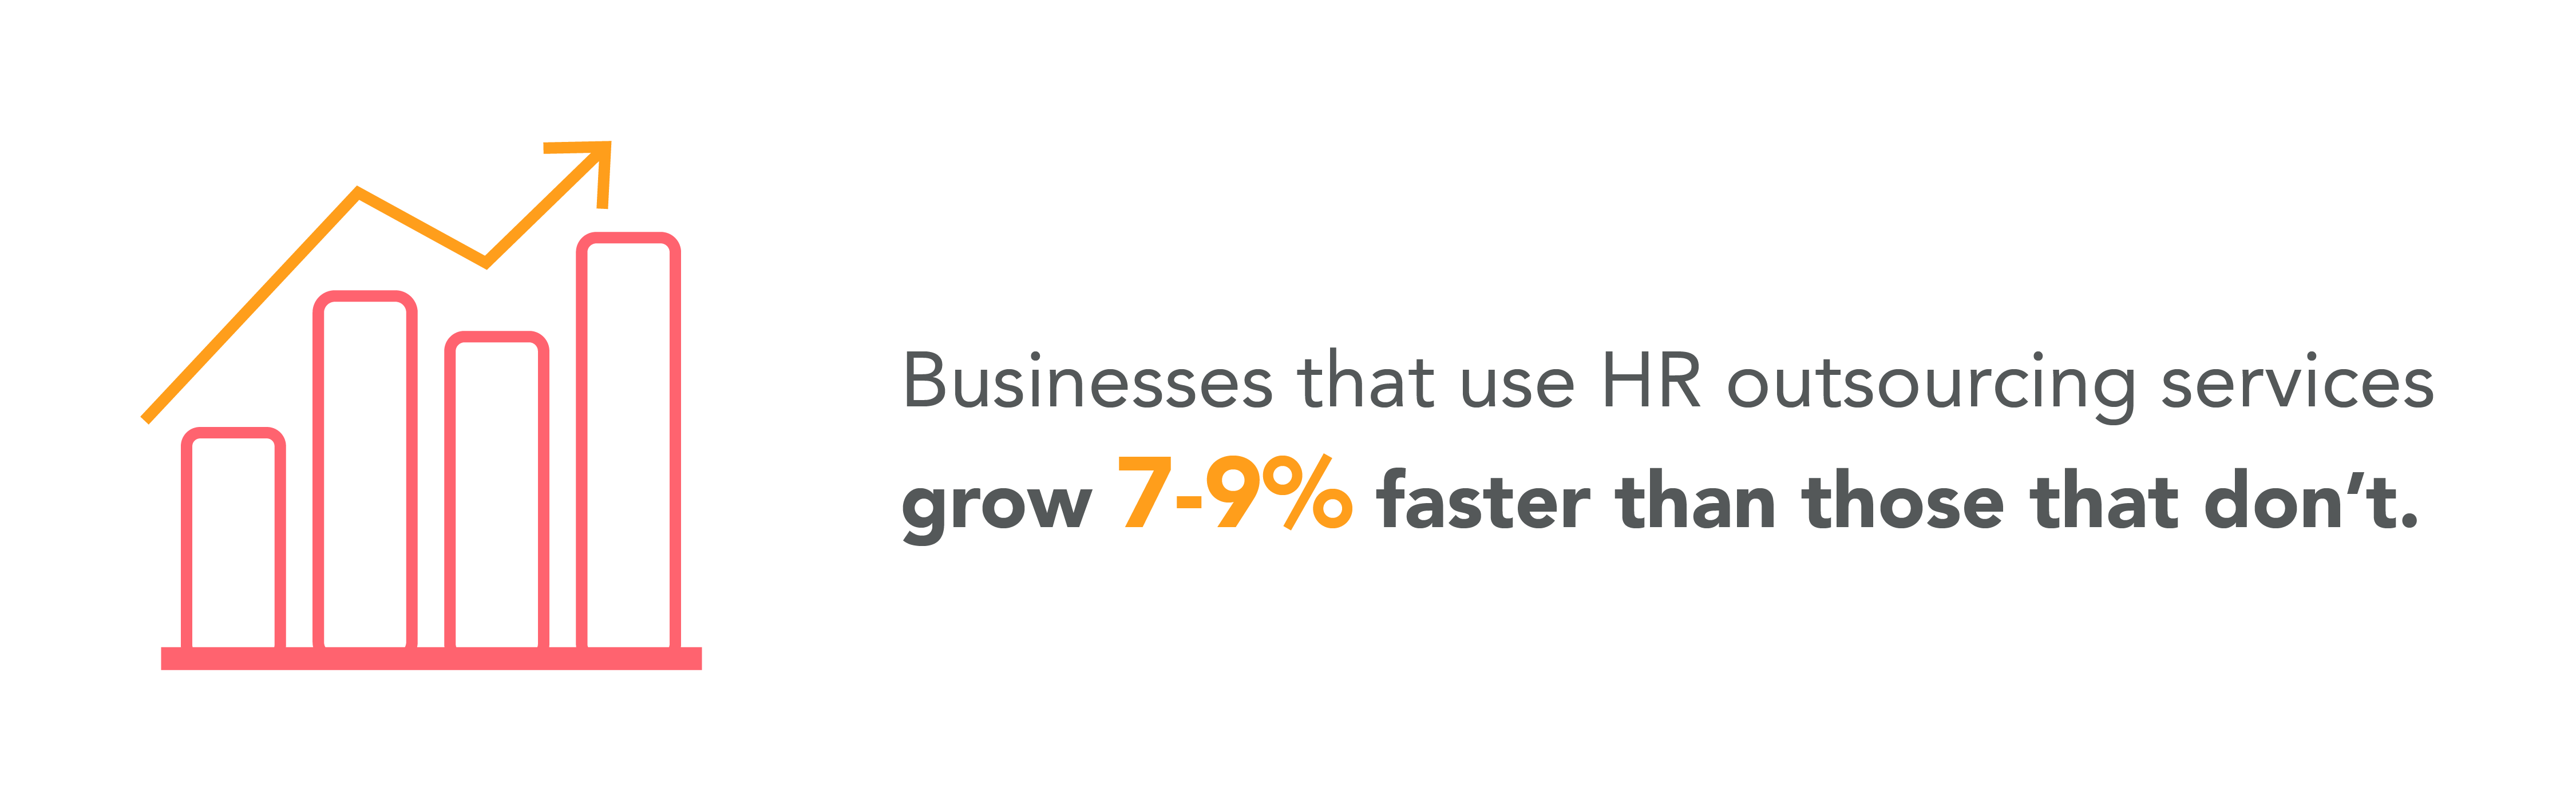 Businesses that use HR outsourcing services grow 7-9% faster than those that do not